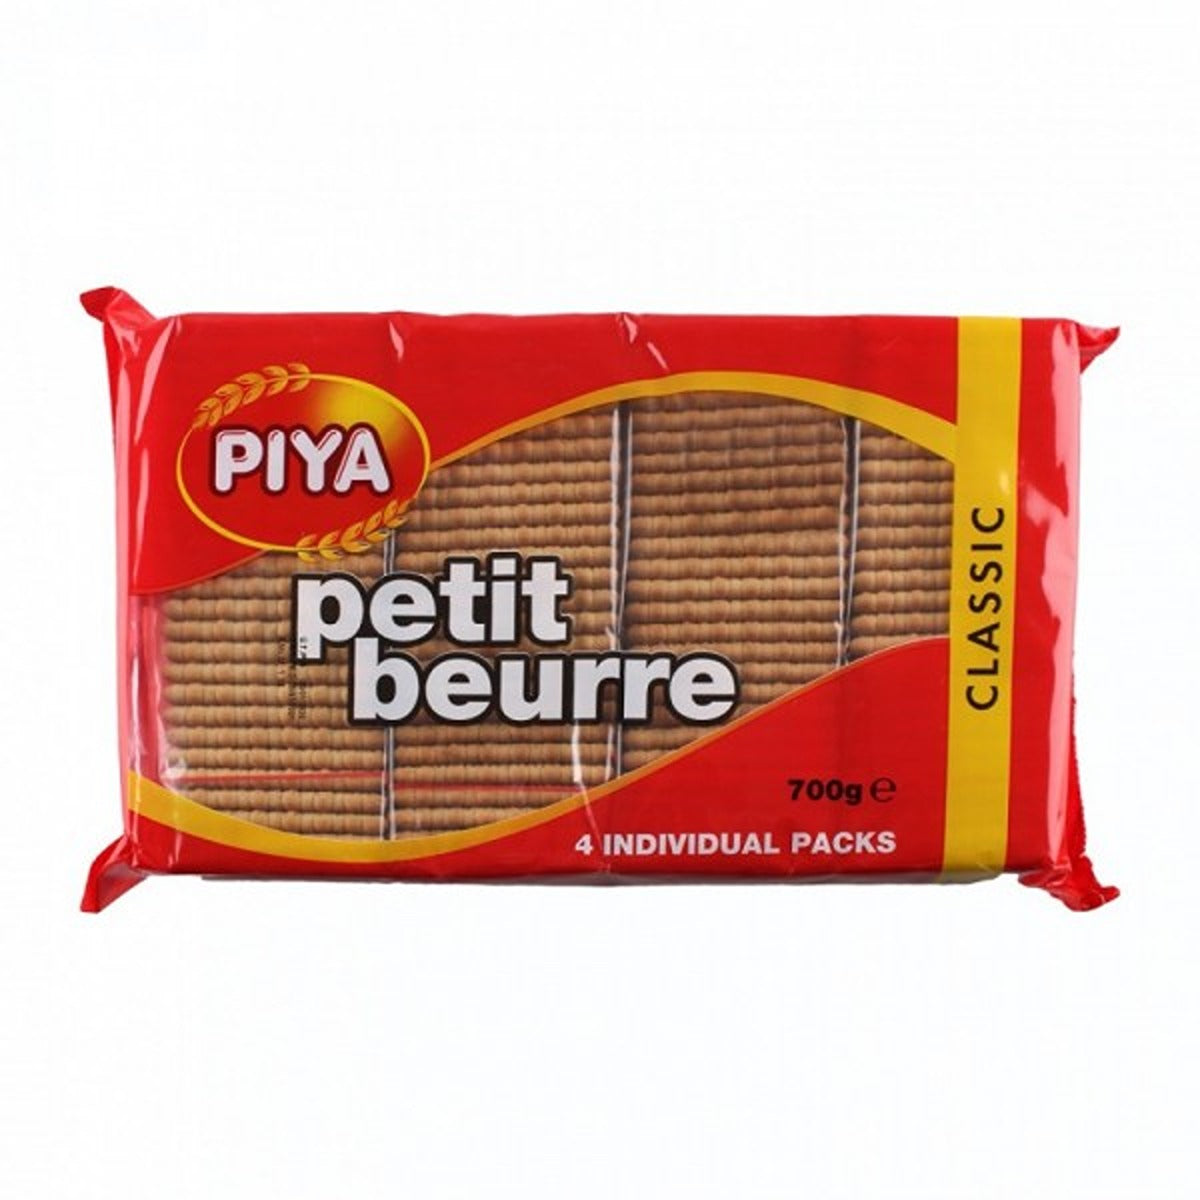 Piya petit Beurre biscuits on a white background.